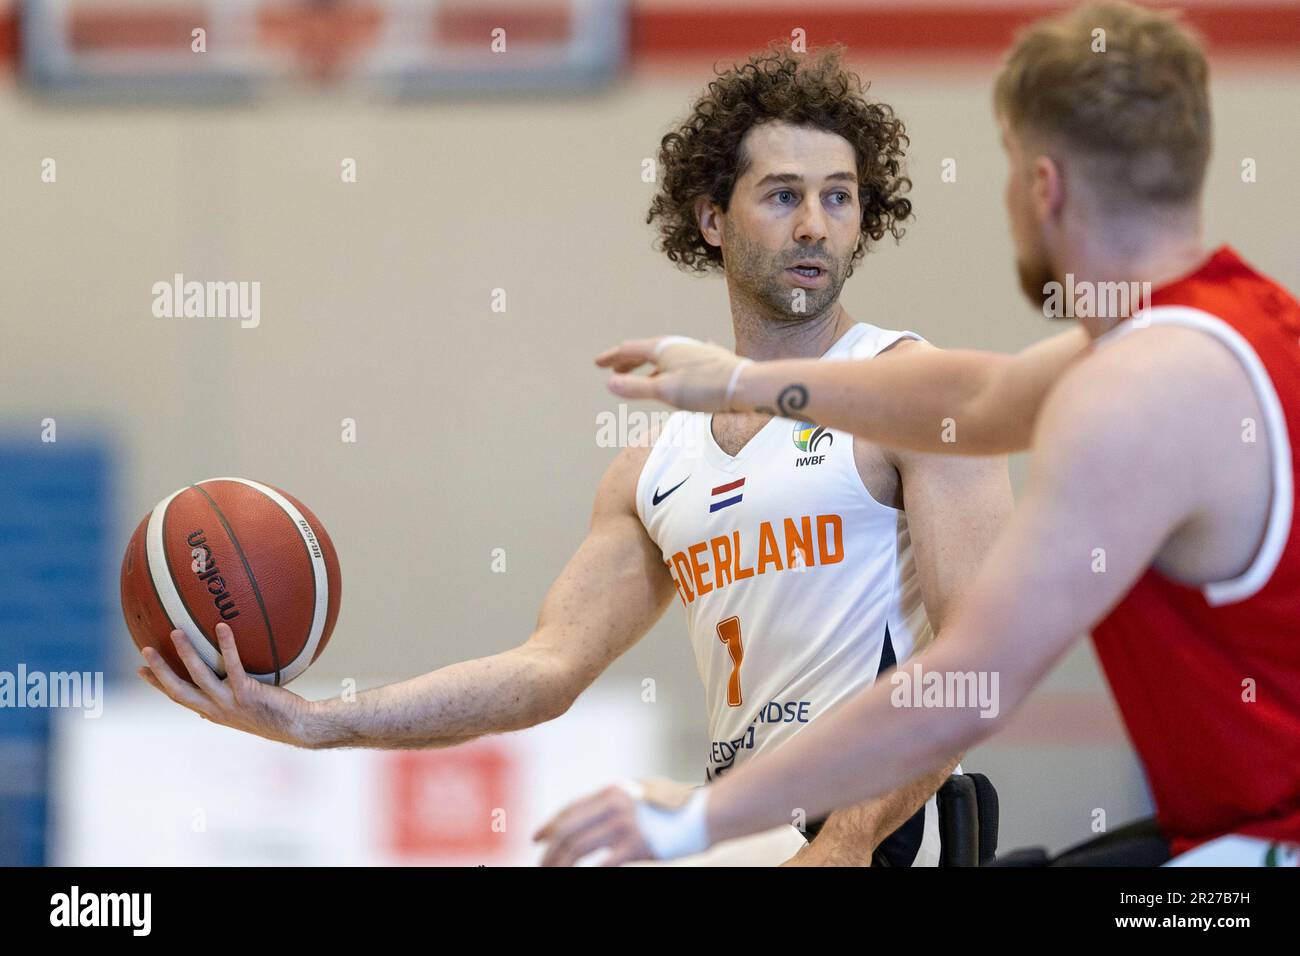 Ottawa, Canada. 17 May 2023. Rabin Paggenwisch (1) of the Netherlands Men's  wheelchair basketball team in men's wheelchair basketball action in the  Canada development squad versus the Netherlands national team in the